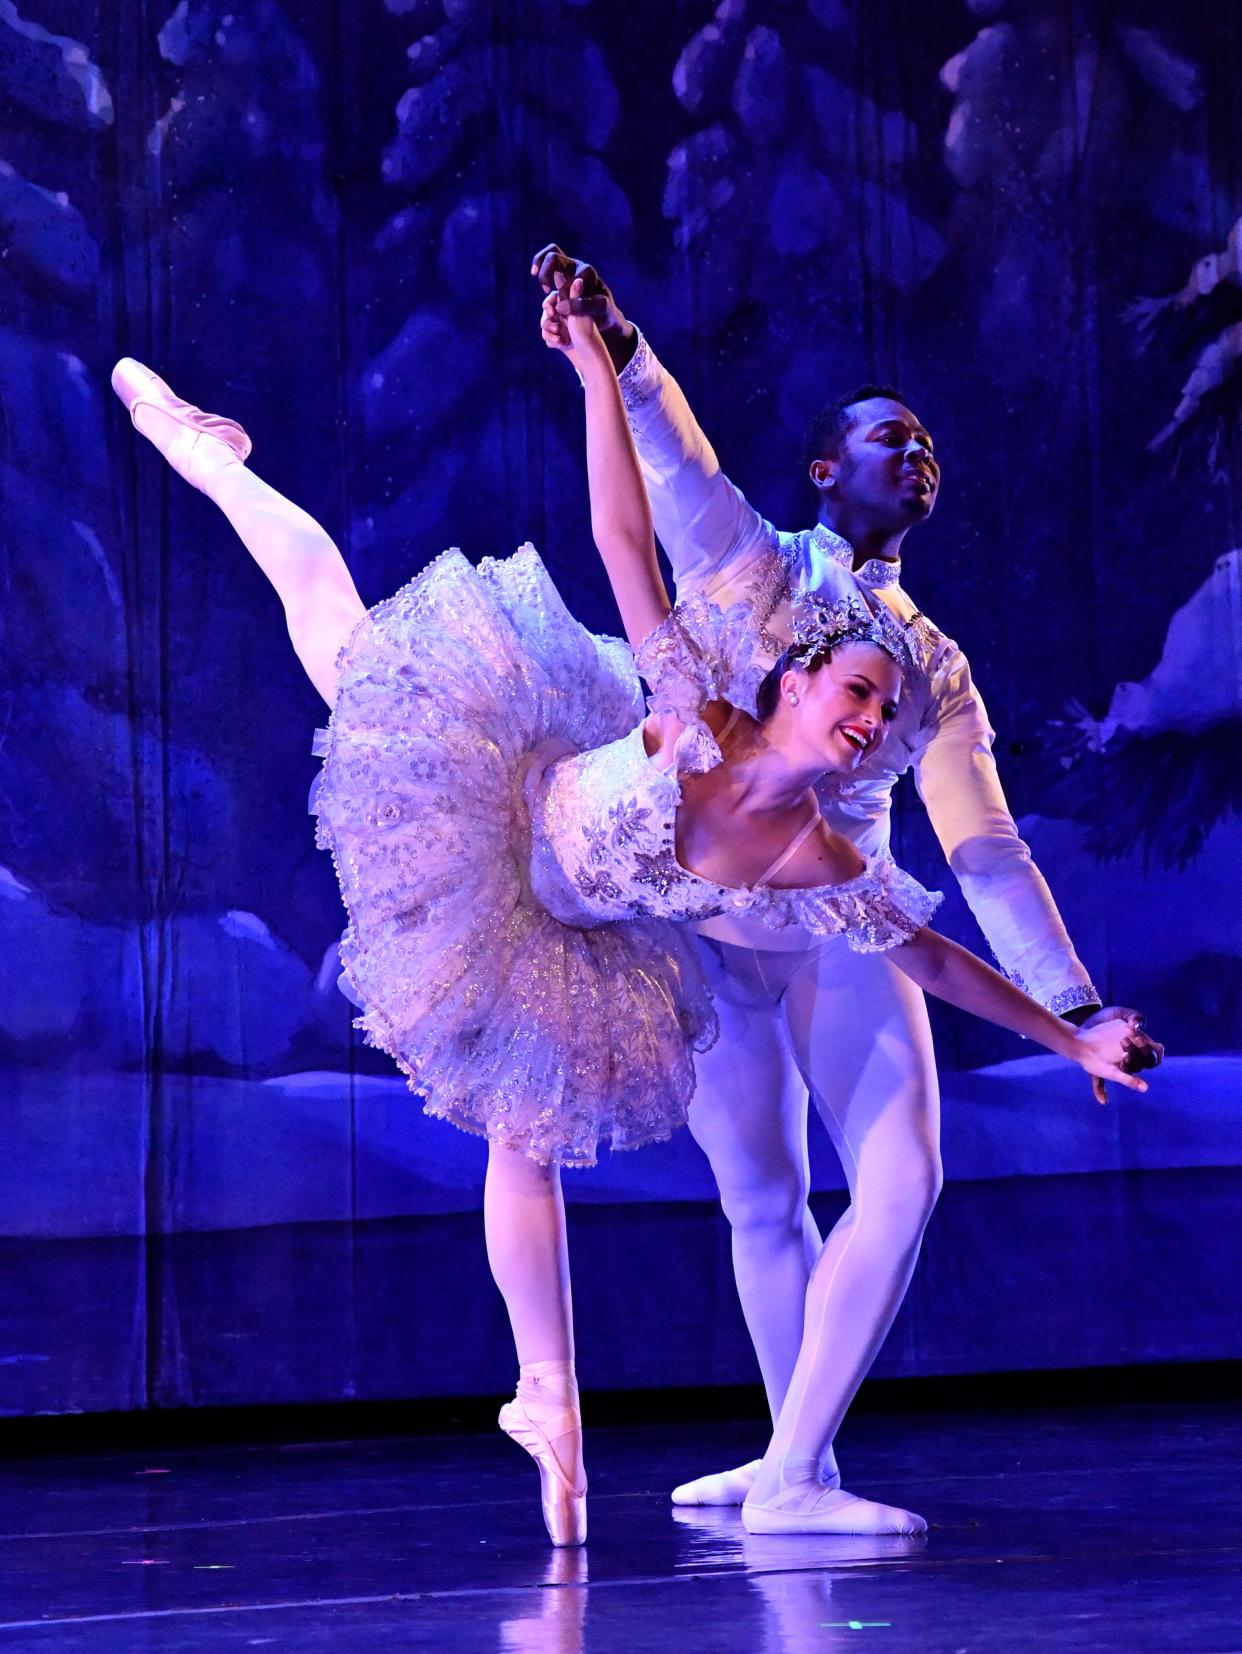 Katelyn Beard and Shannon Beacham dance as the Snow Queen and King in the Snow Scene of a 2018 performance of "The Nutcracker" for schoolchildren at the Paramount Theatre.